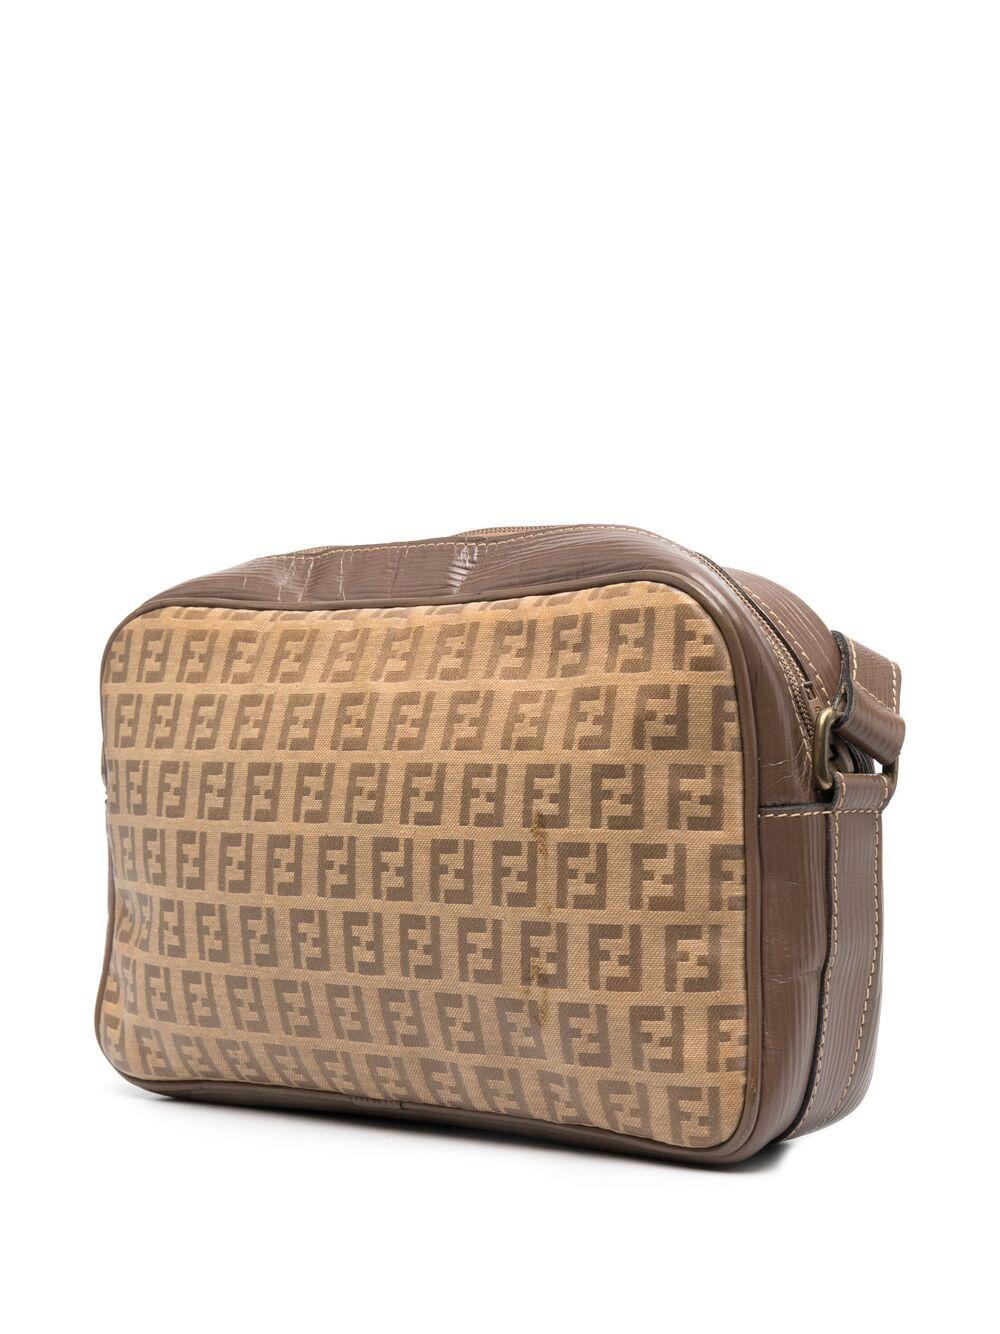 1970s Fendi taupe monogram logo Zucca pattern shoulder bag featuring a taupe leather finishing, a top zip opening, a canvas logo pattern, an inside leather lining, a leather shoulder handle, and an inside logo stamp. 
Circa 1970s. 
Length 10.2in